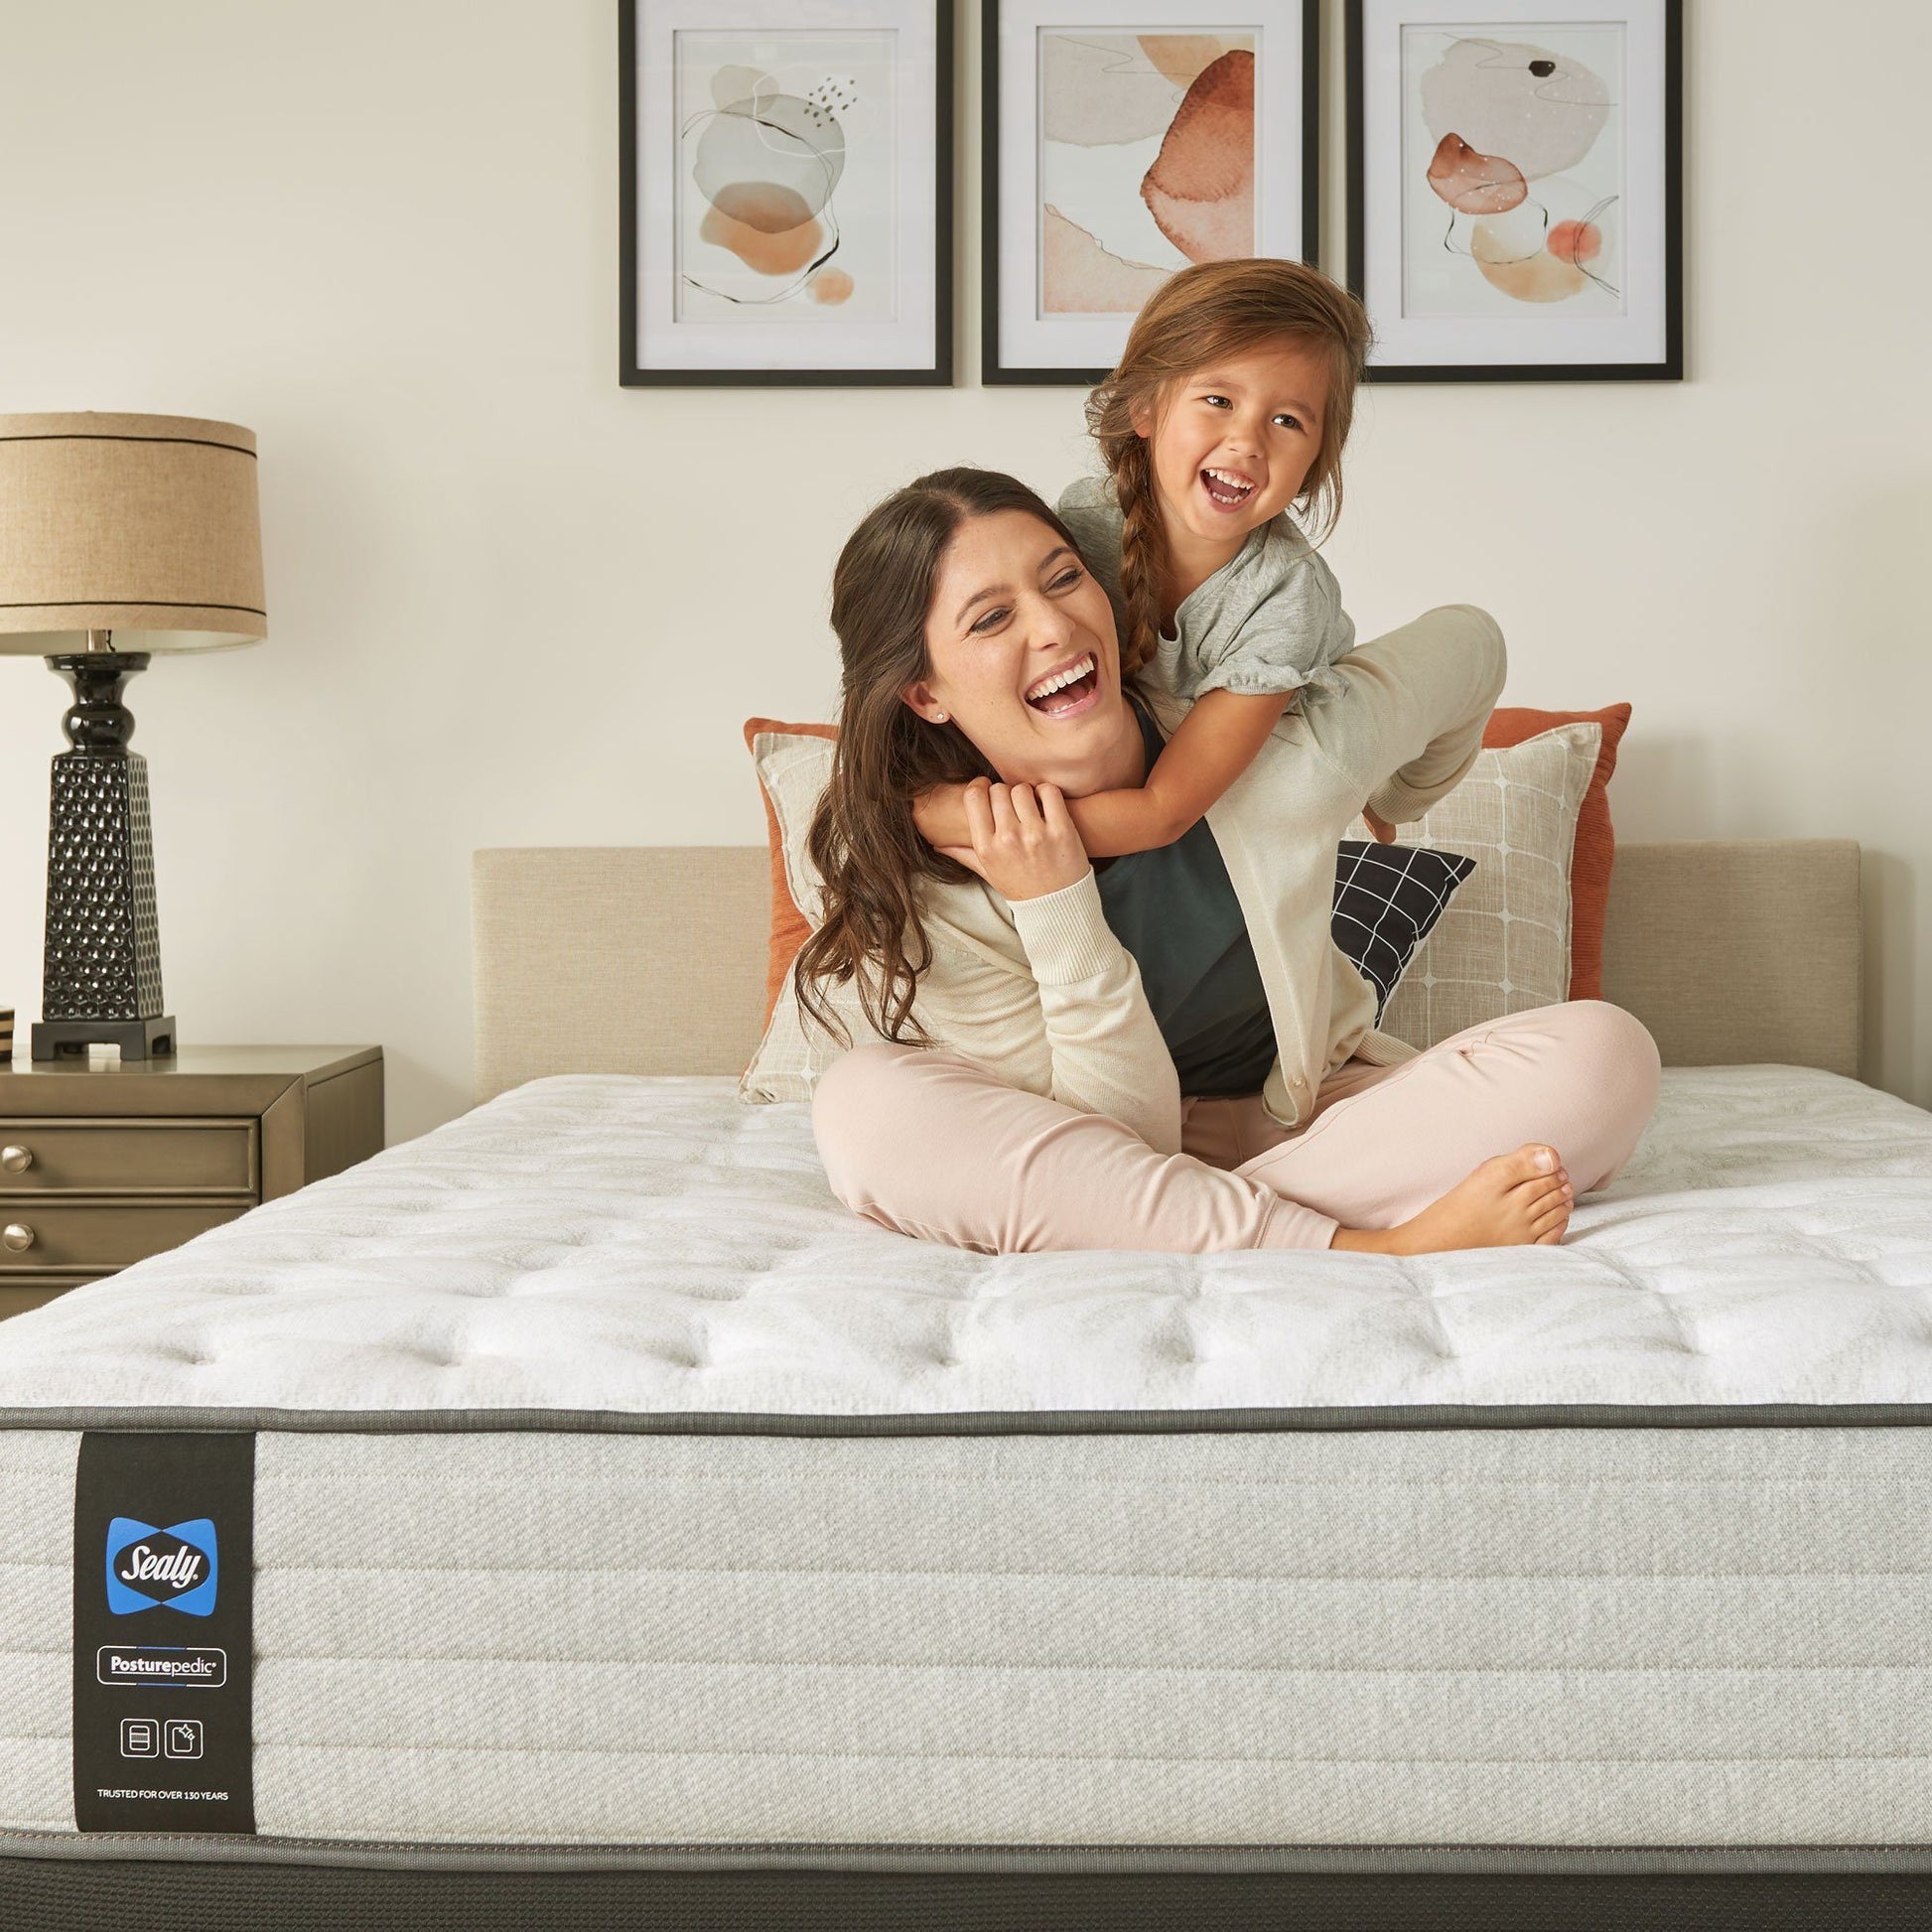 Sealy Hatton Soft Mattress In Bedroom Woman And Child Relaxing